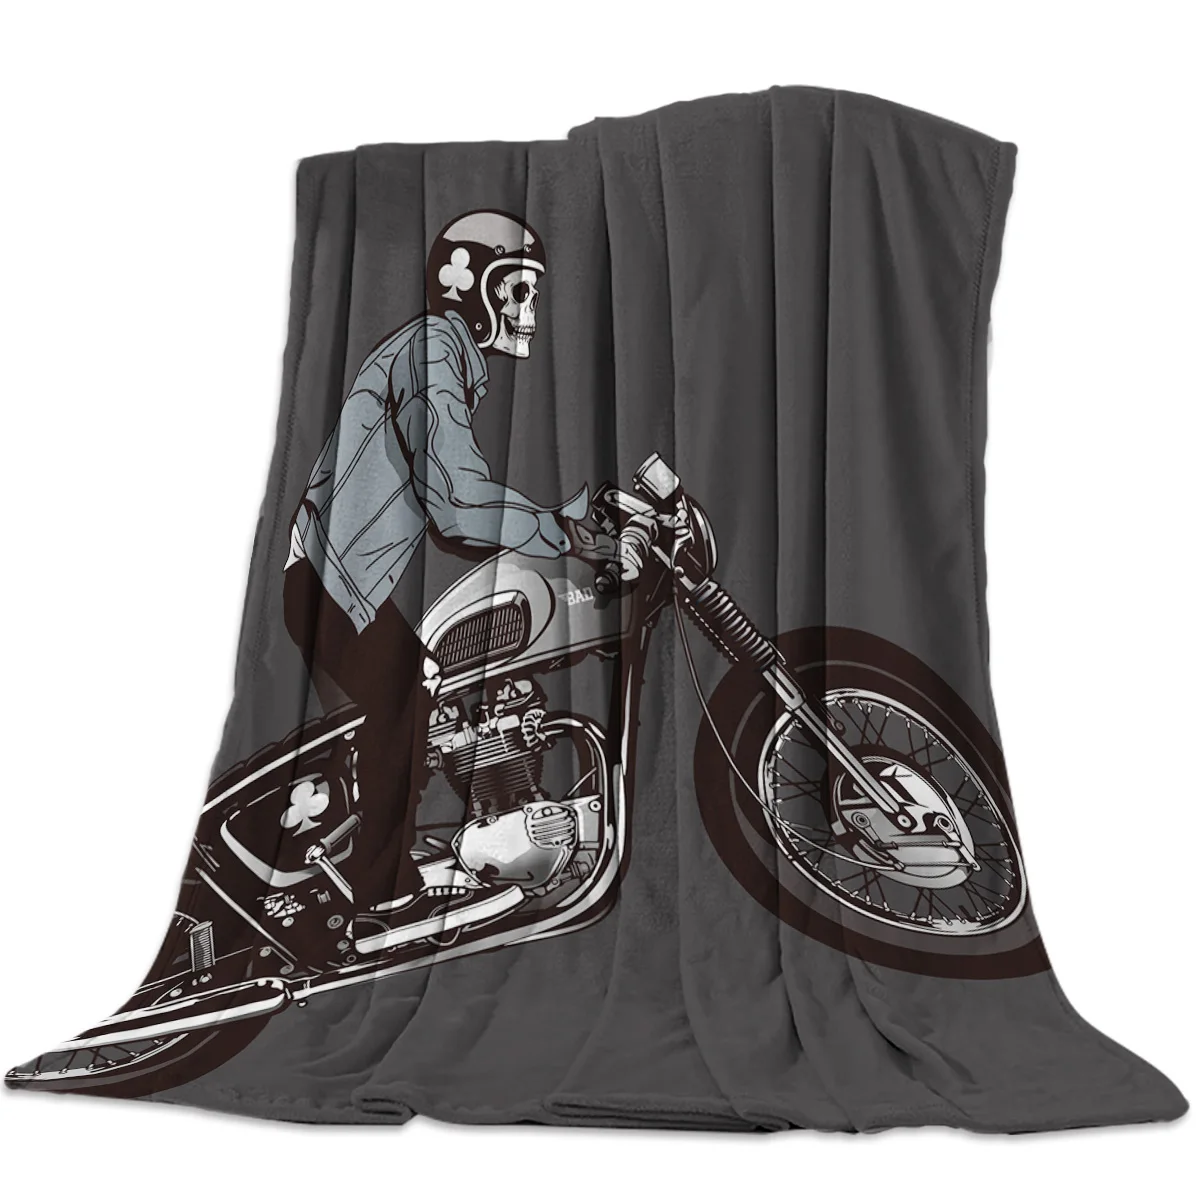 

Motorcycle Skull Boy Pattern Flannel Throw Blanket for Sofa Couch Bed Decor Soft Lightweight Warm Motorcycle Enthusiast Gift